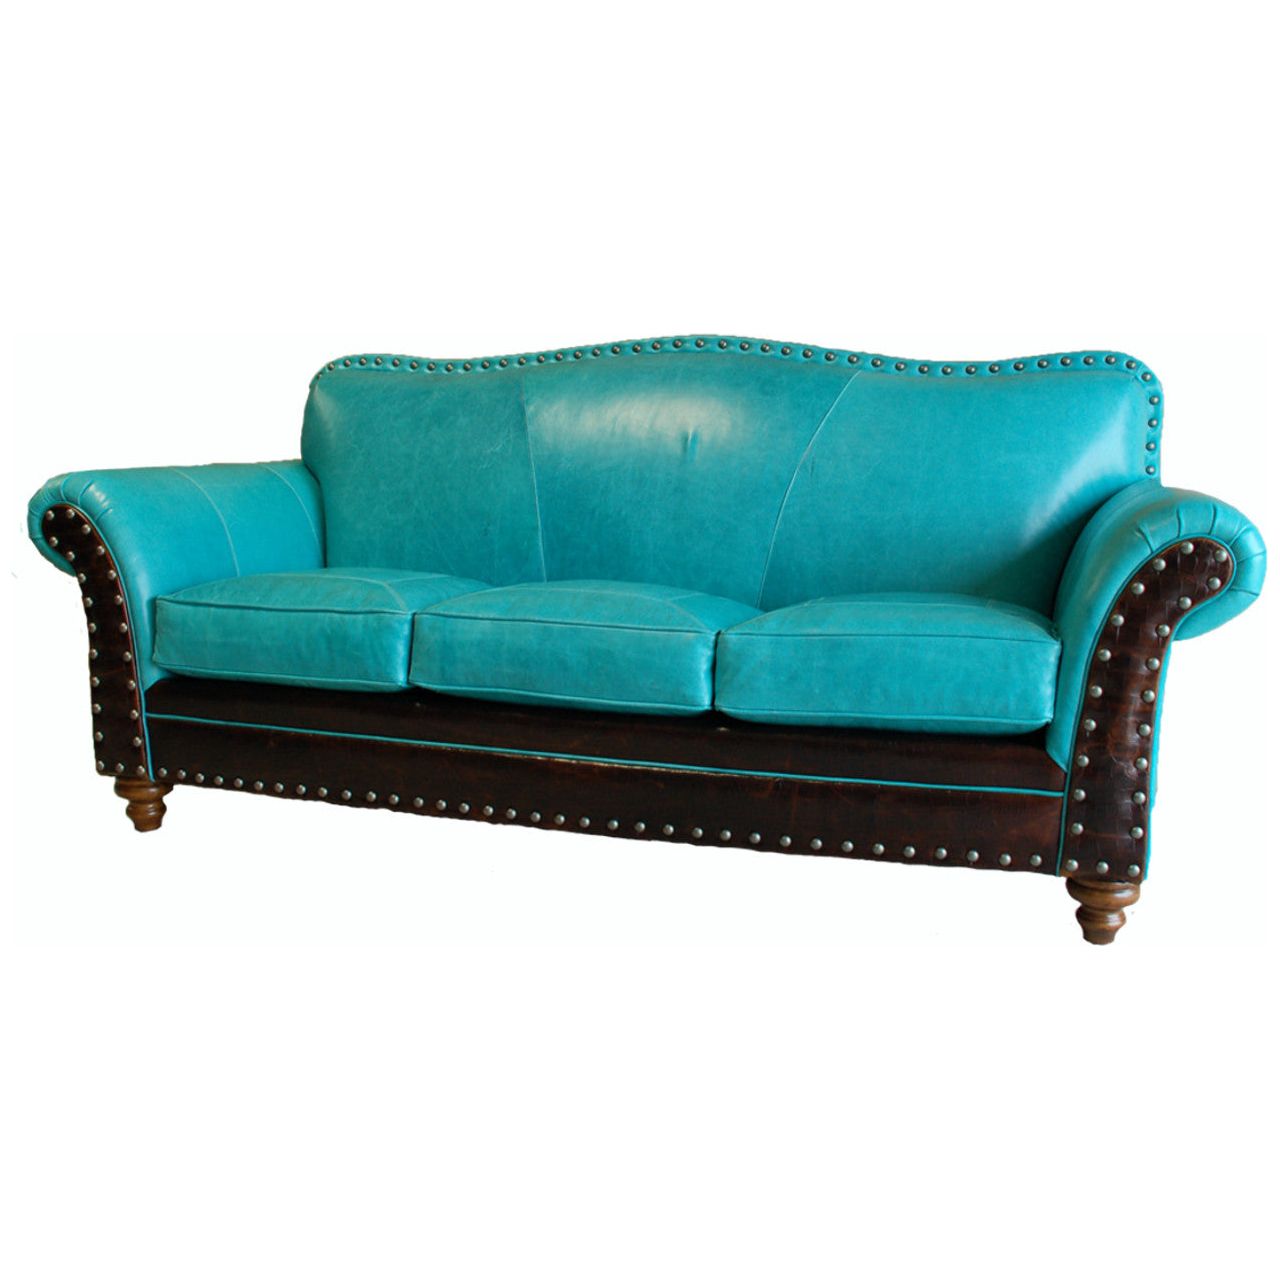 Turquoise Leather Sofa Couch Great Blue Heron Furniture